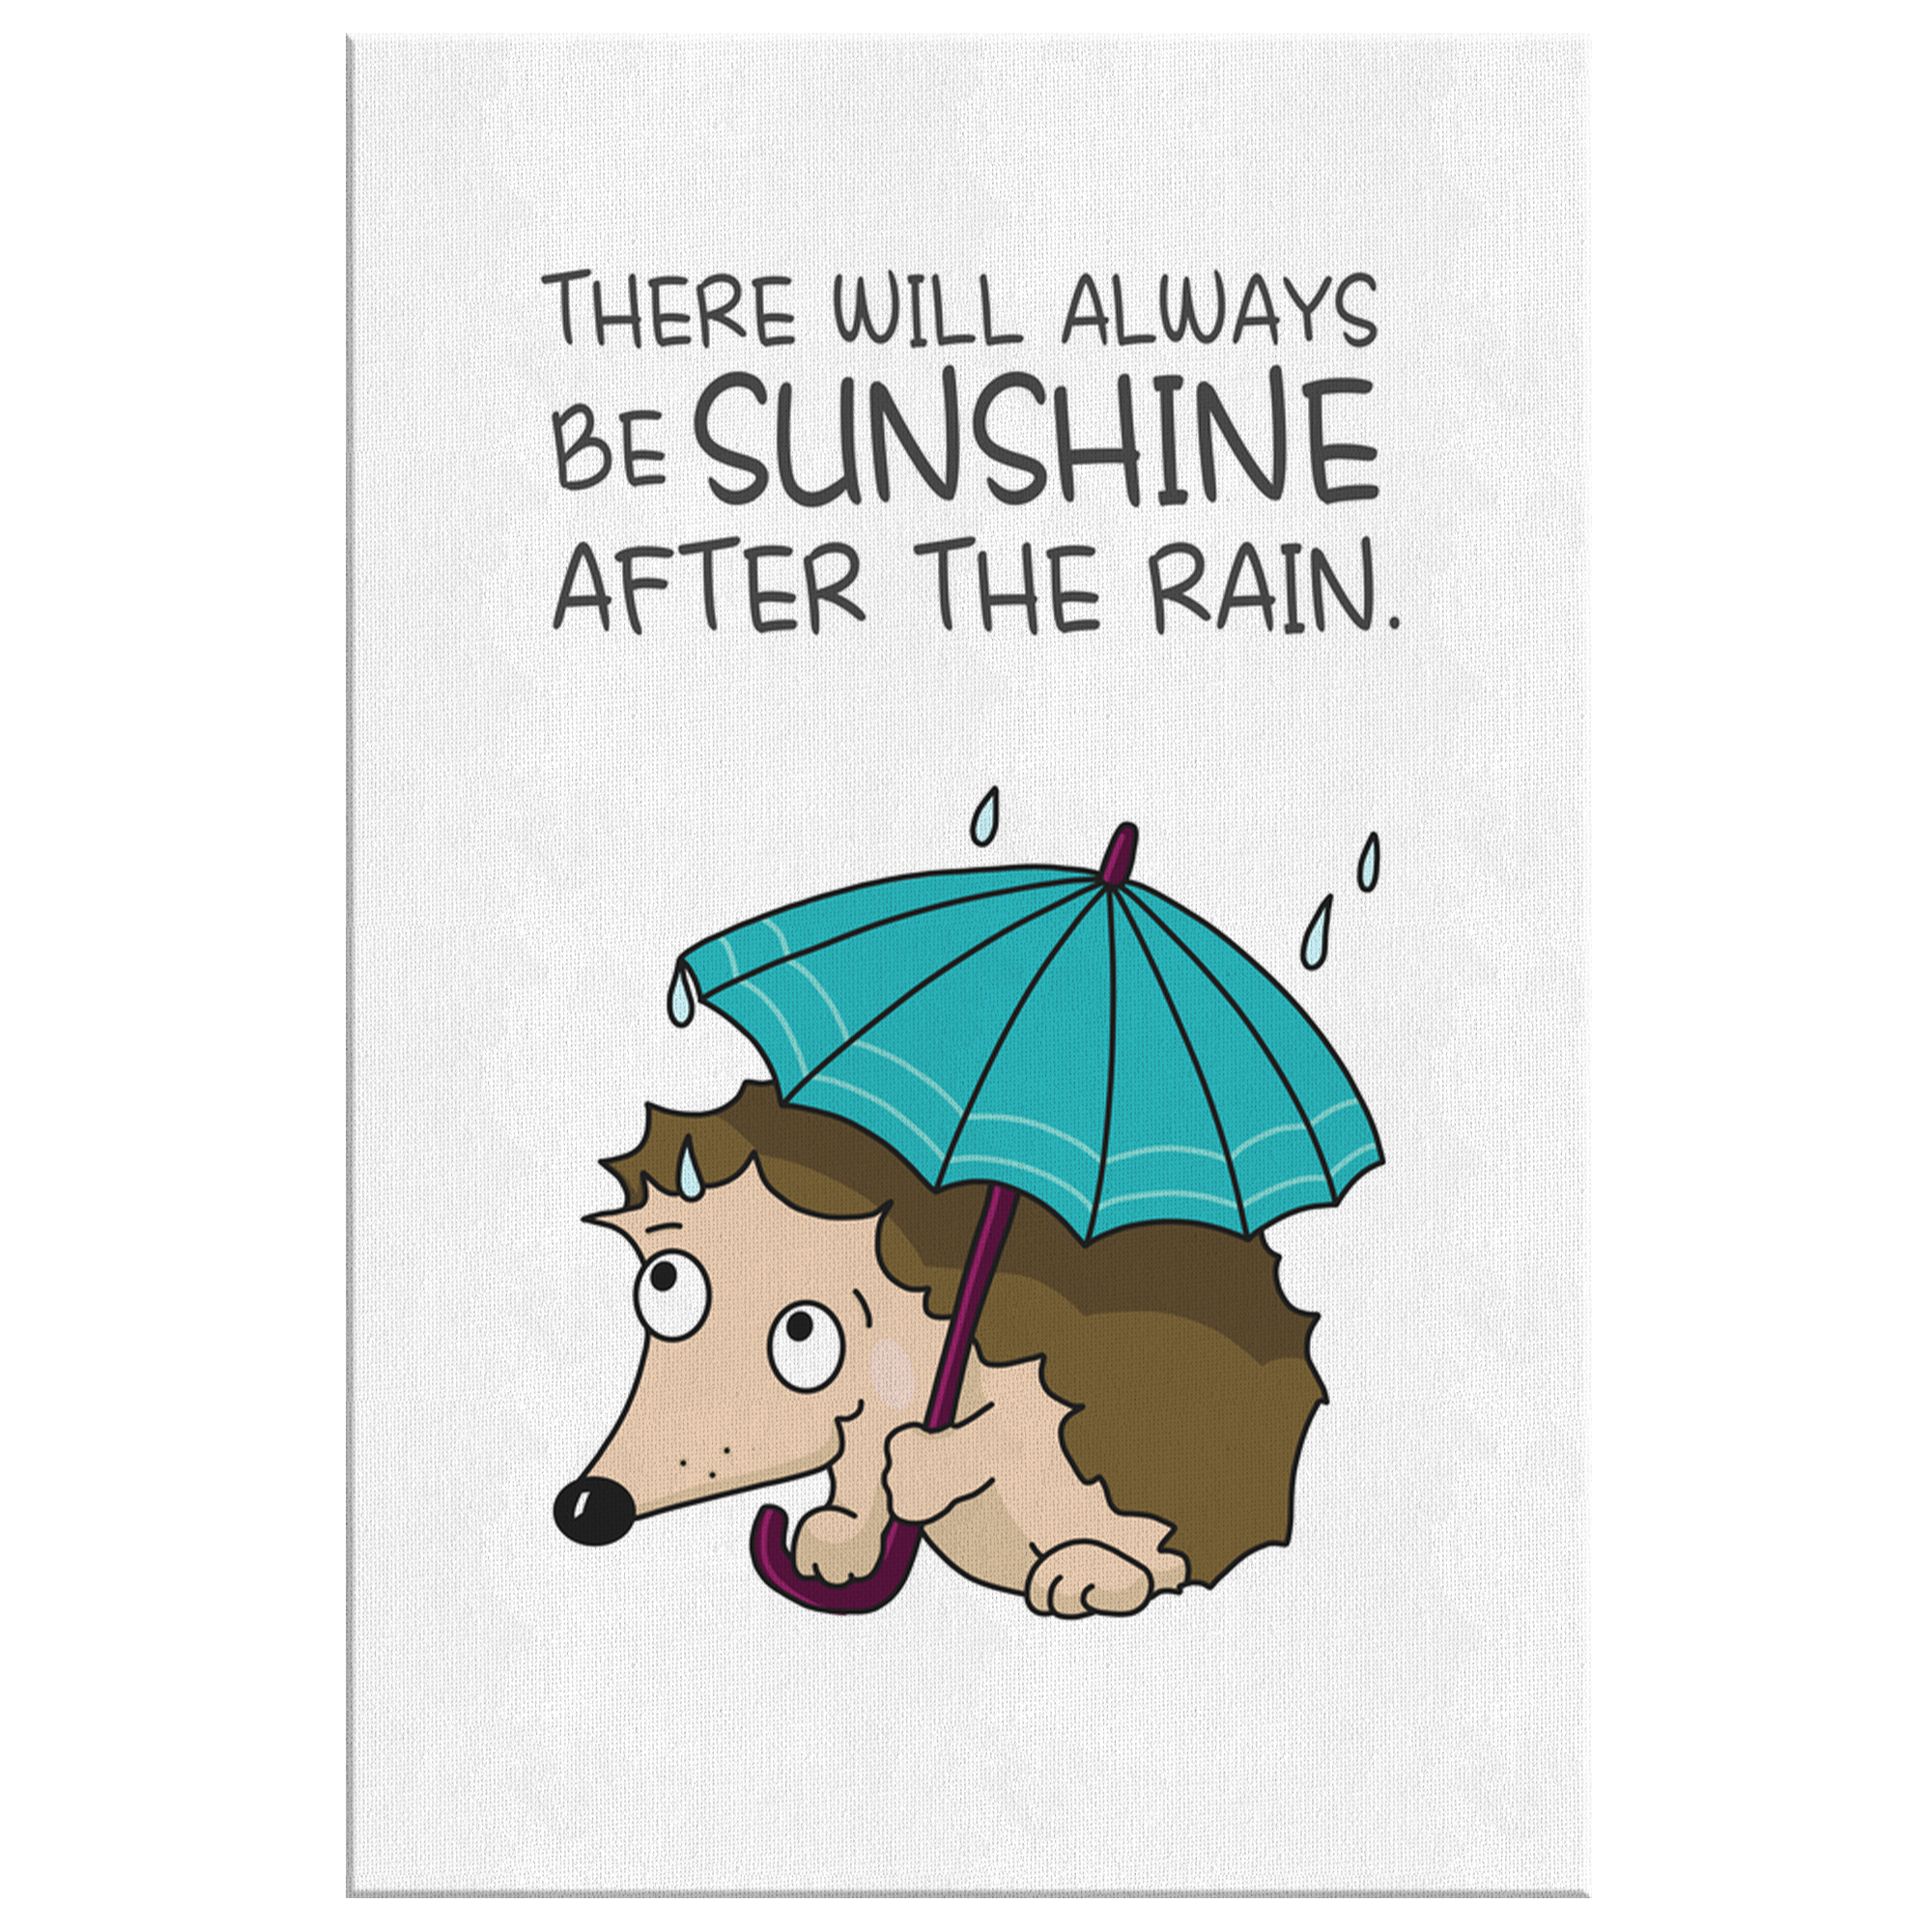 Gallery Quality Canvas Print｜Sunshine After The Rain